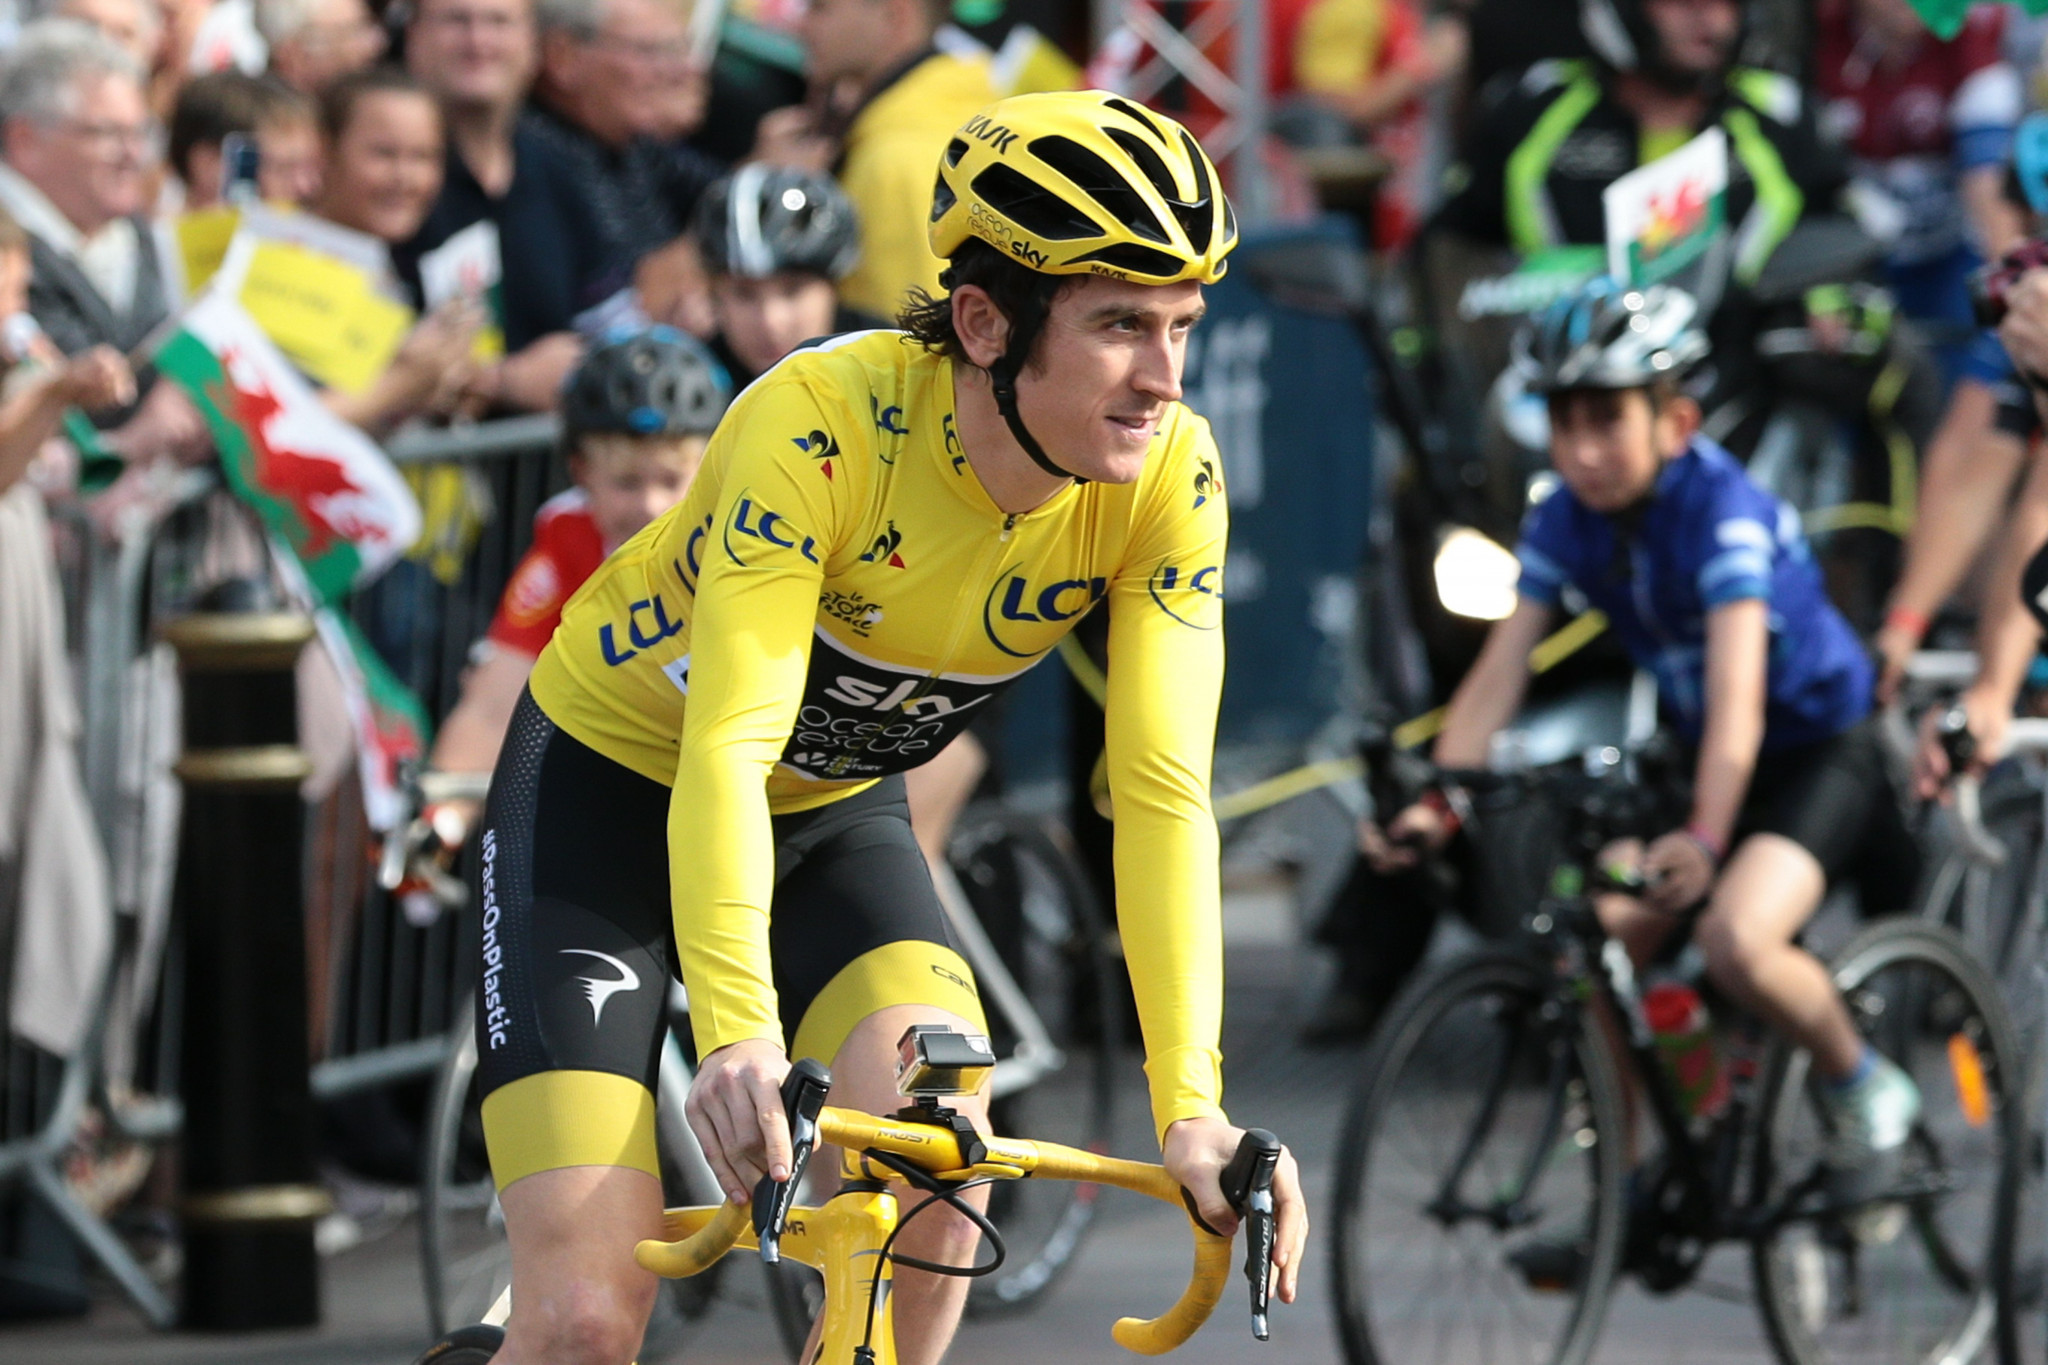 Geraint Thomas, the Tour de France winner, is a part of British sporting success ©Getty Images